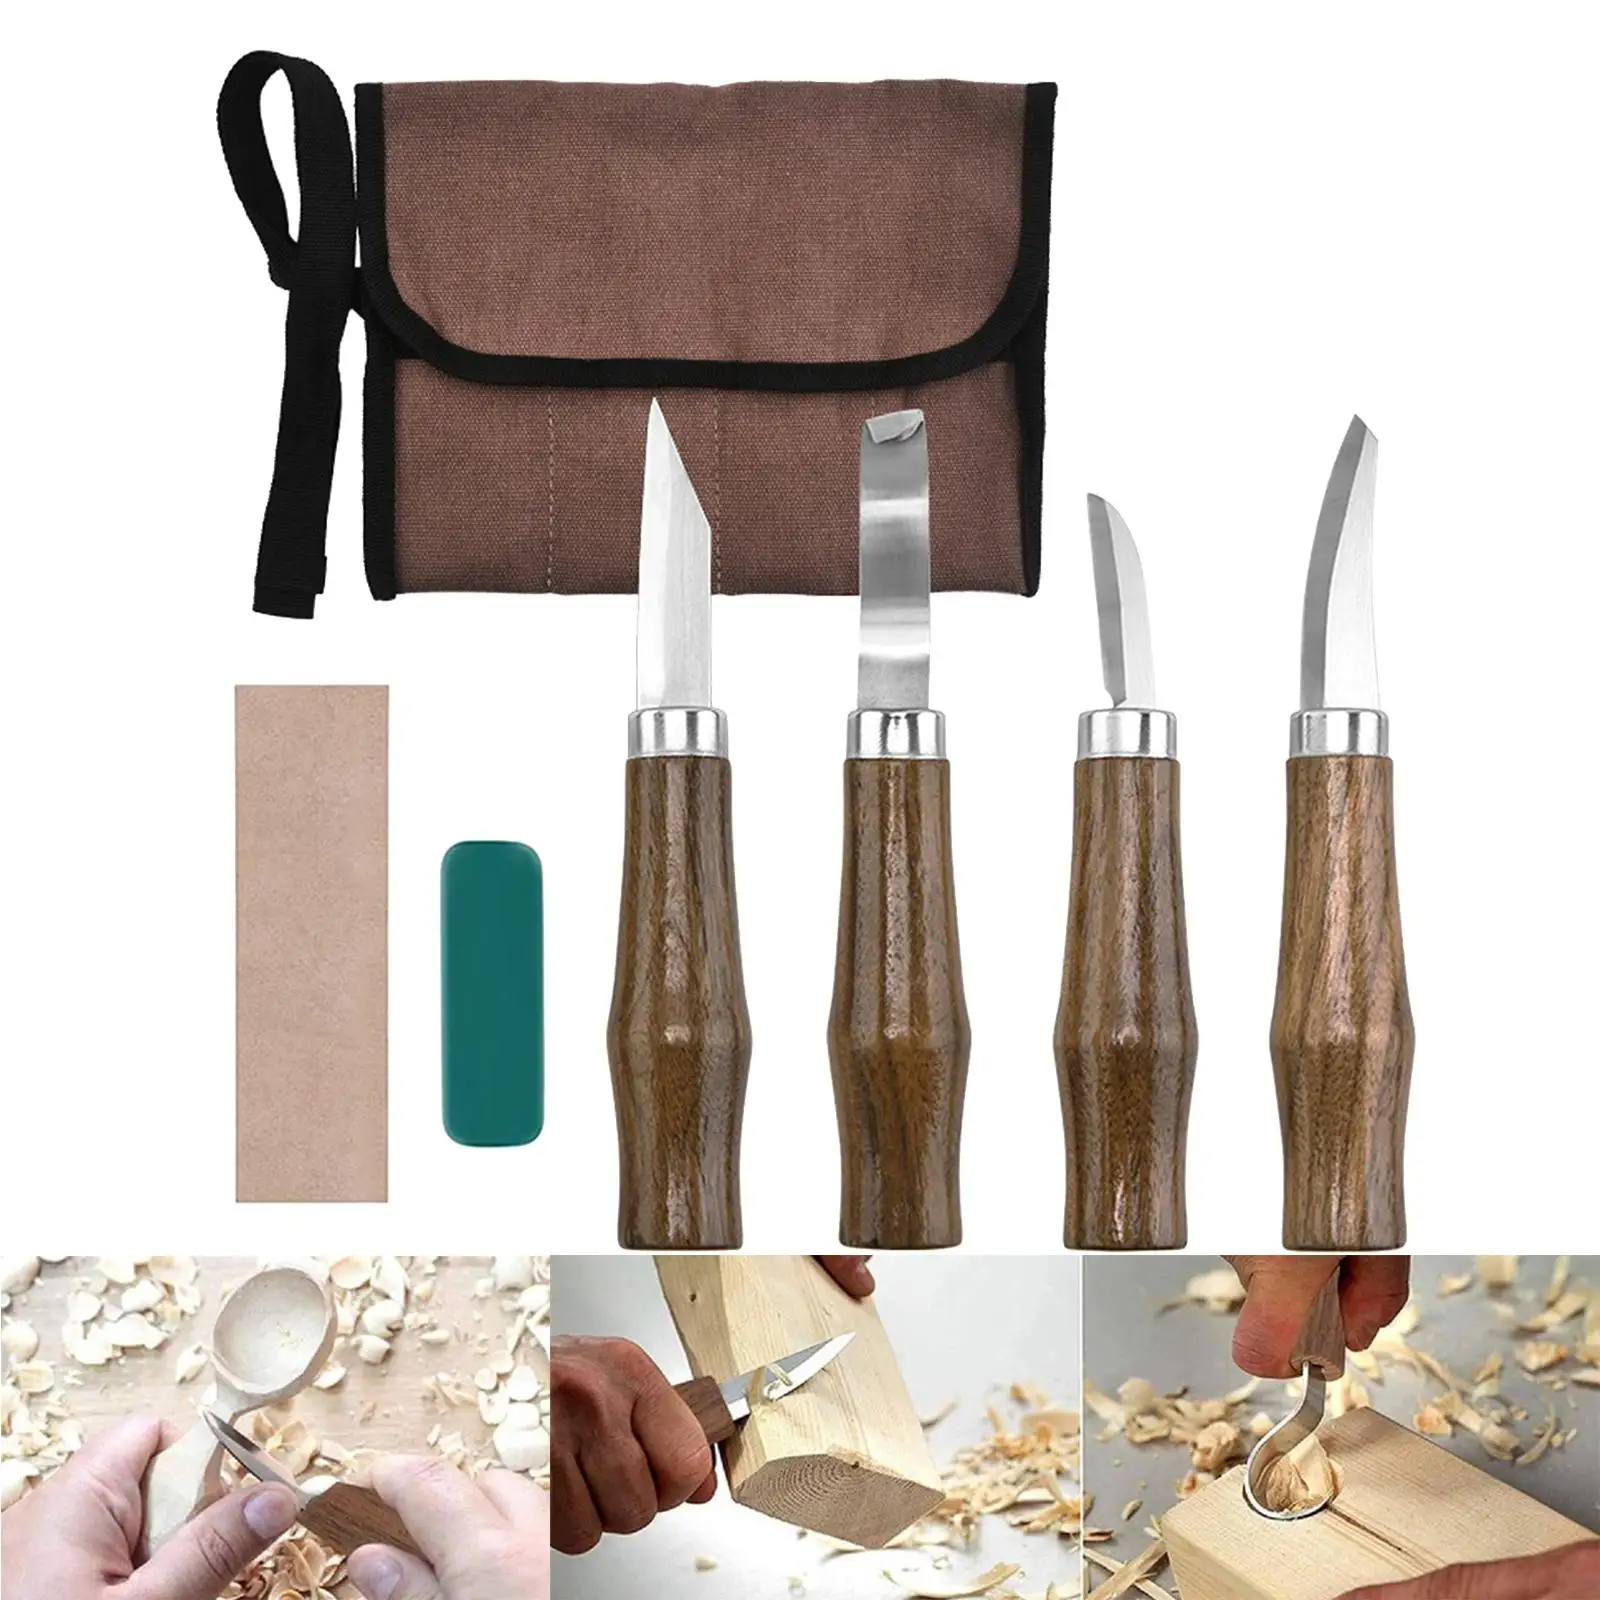 7 Pieces Professional Wood Carving Knife Kit Woodworking Cutter Whittling